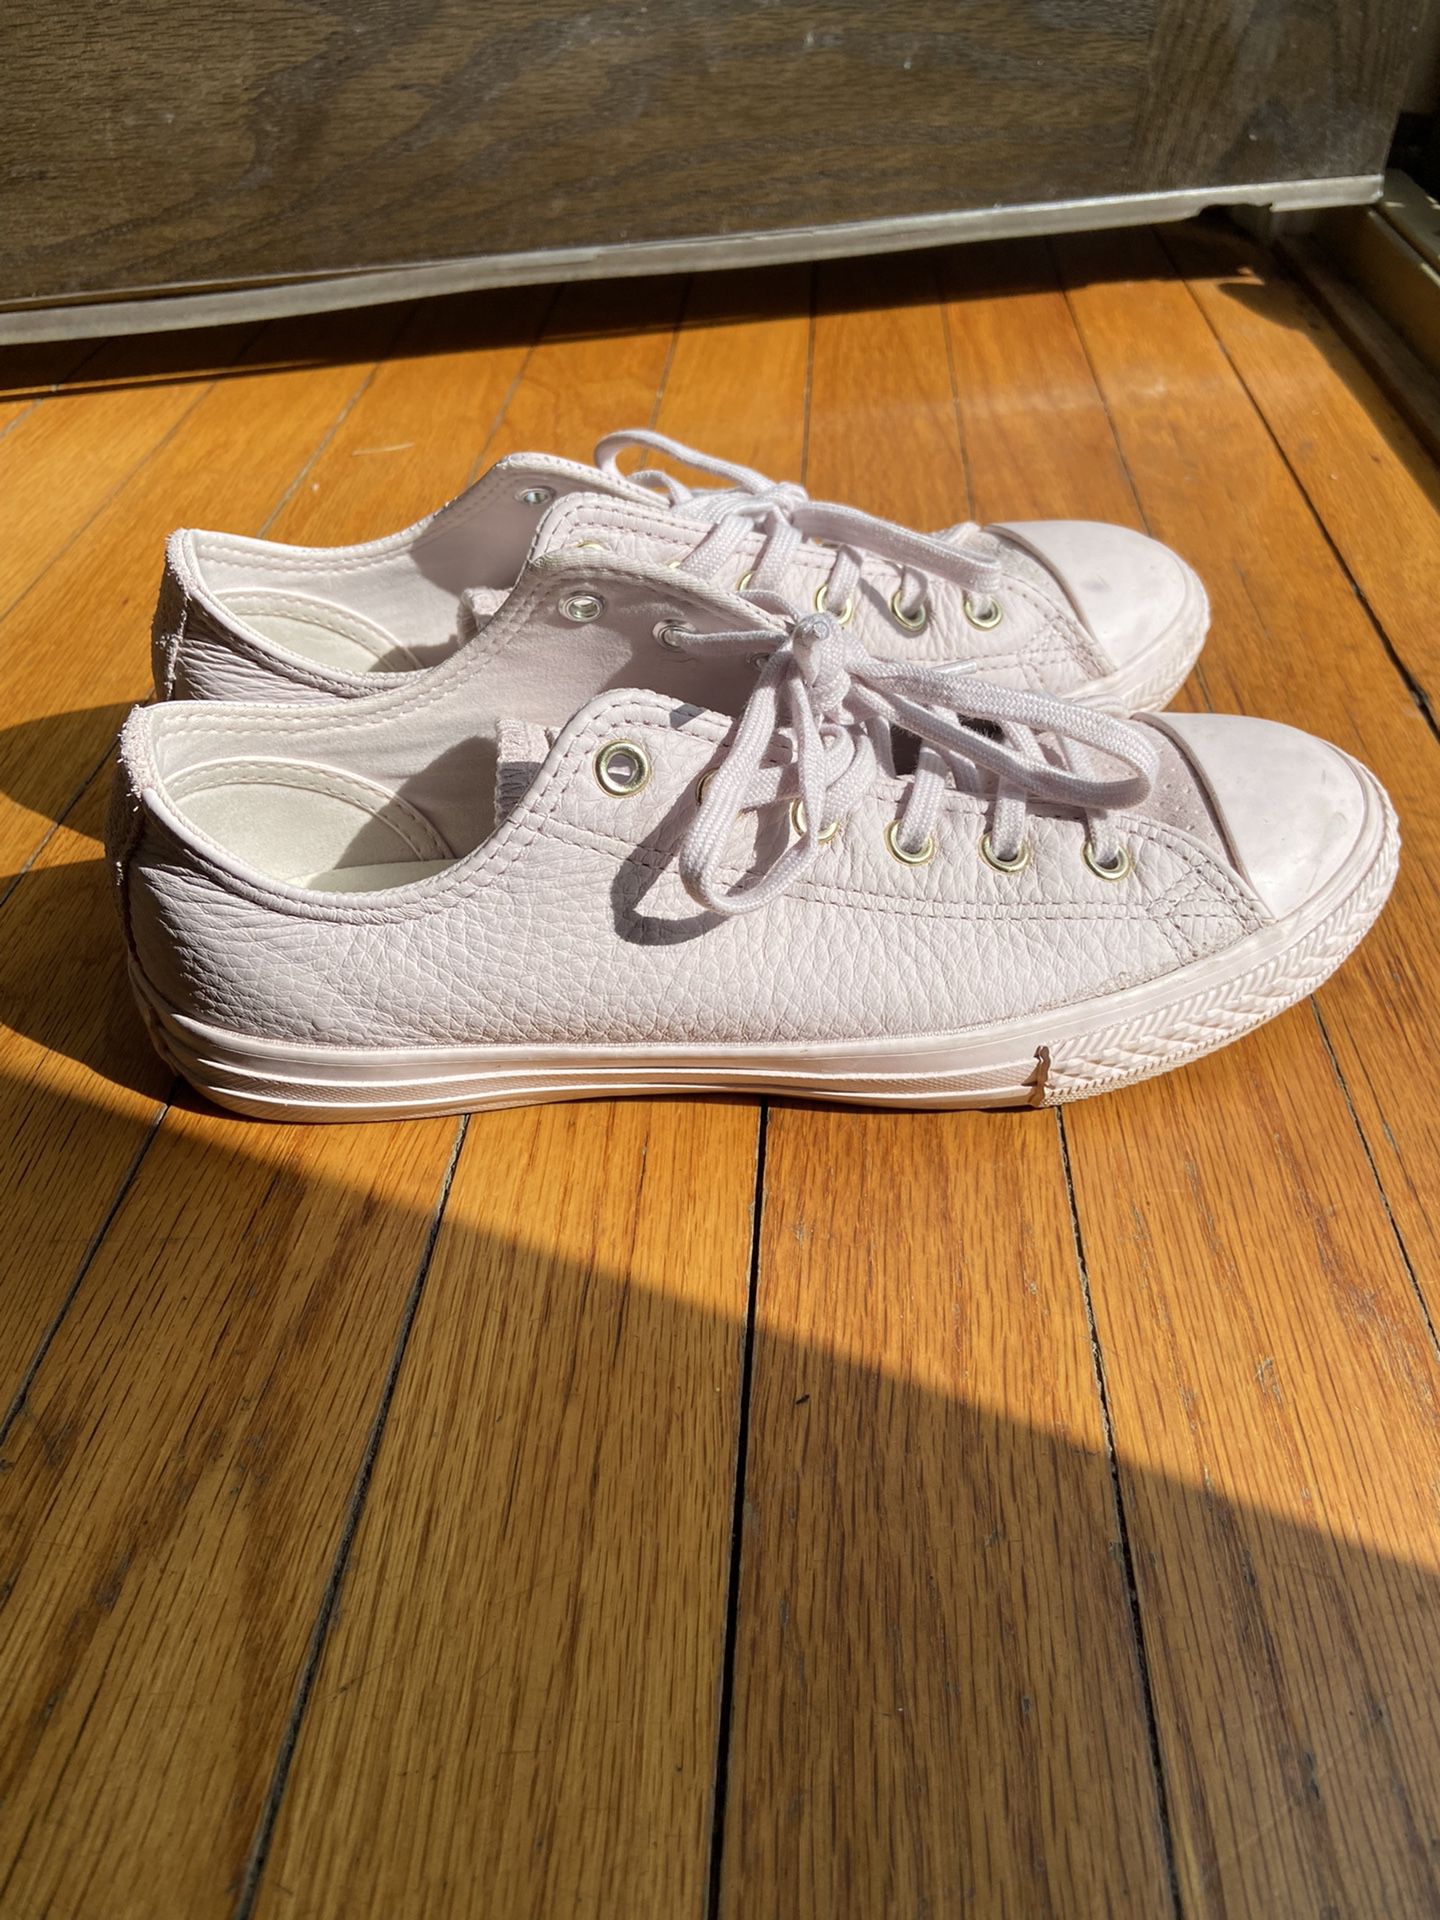 Leather Converse Chuck Taylor Low Sneakers Size 4.5Y